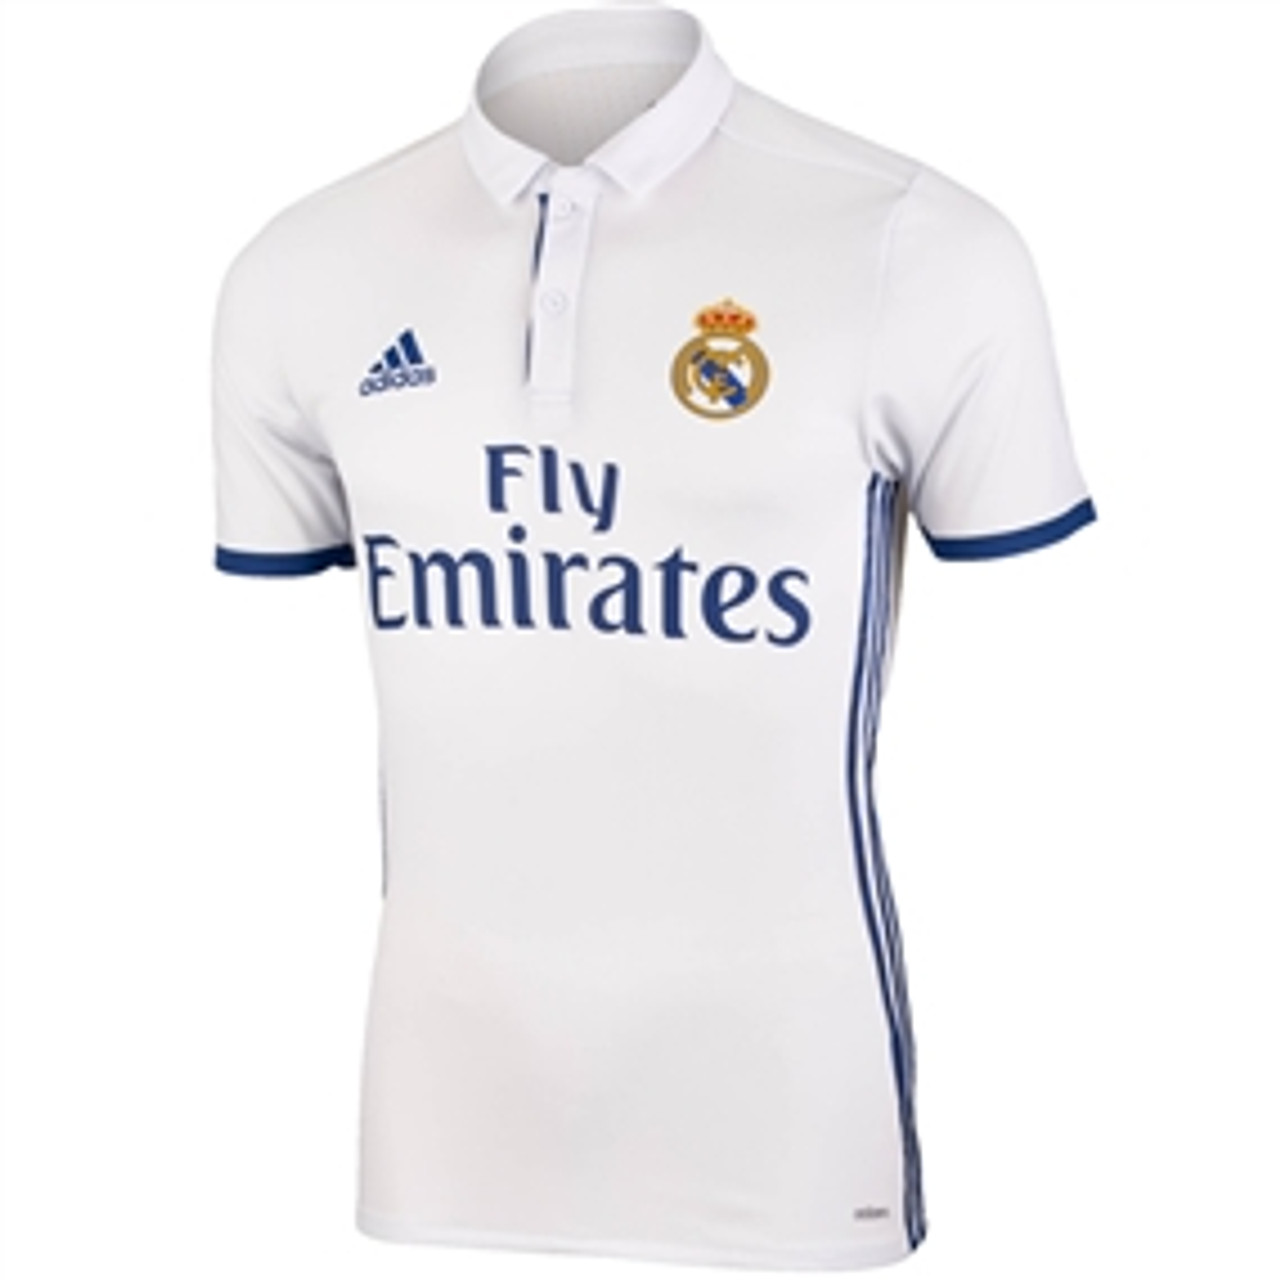 real madrid white and blue jersey